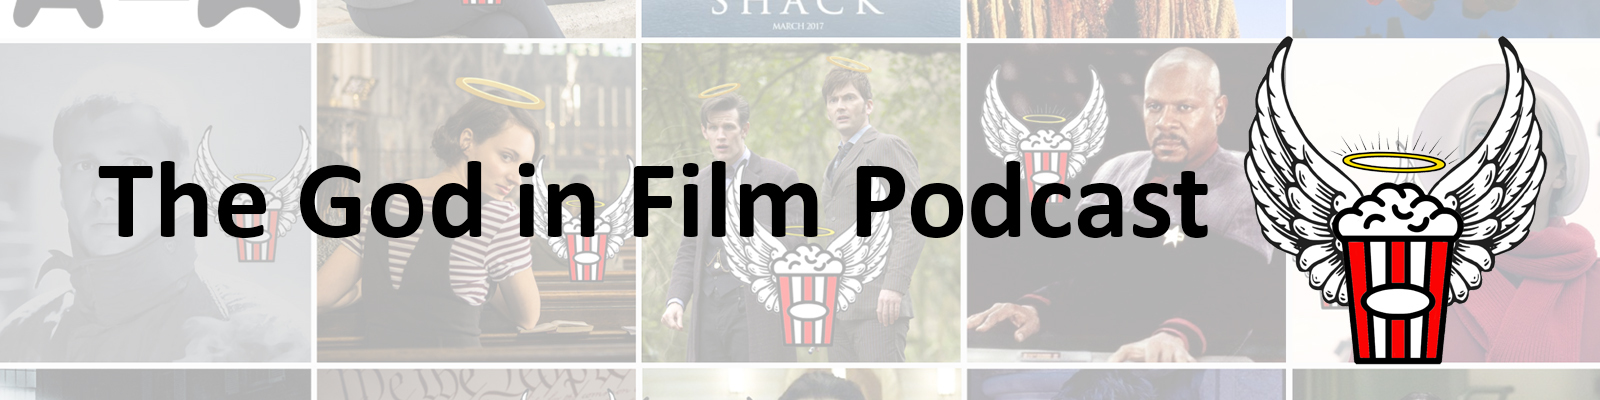 The God in Film Podcast